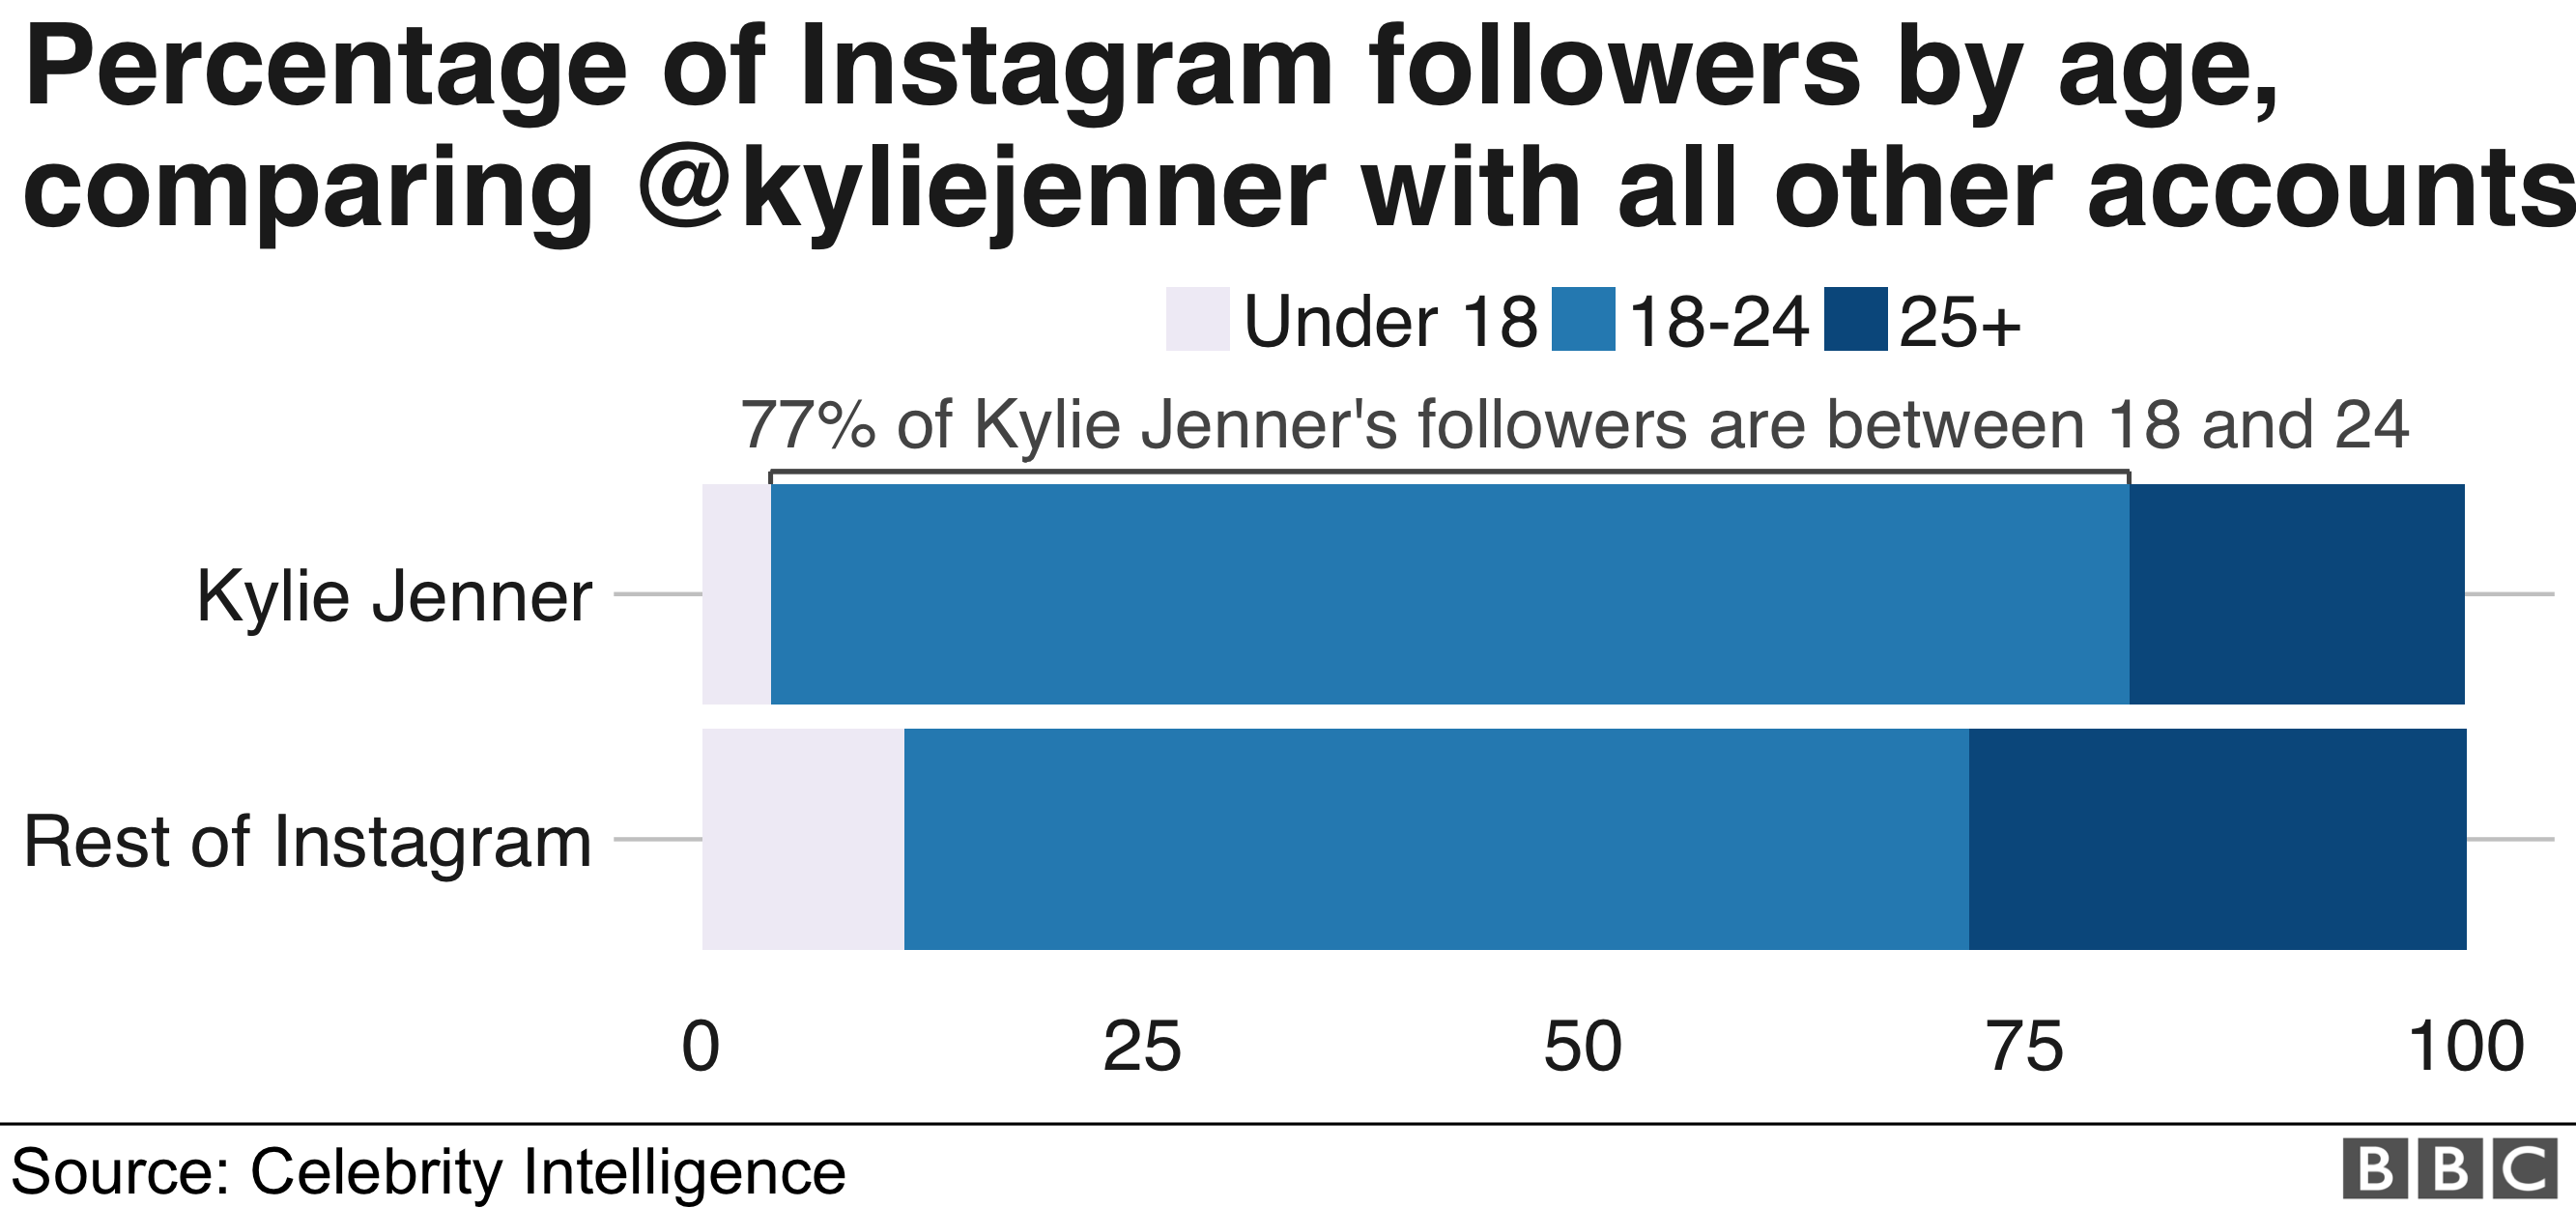 77% of Kylie Jenner's Instagram followers are aged between 18 and 24